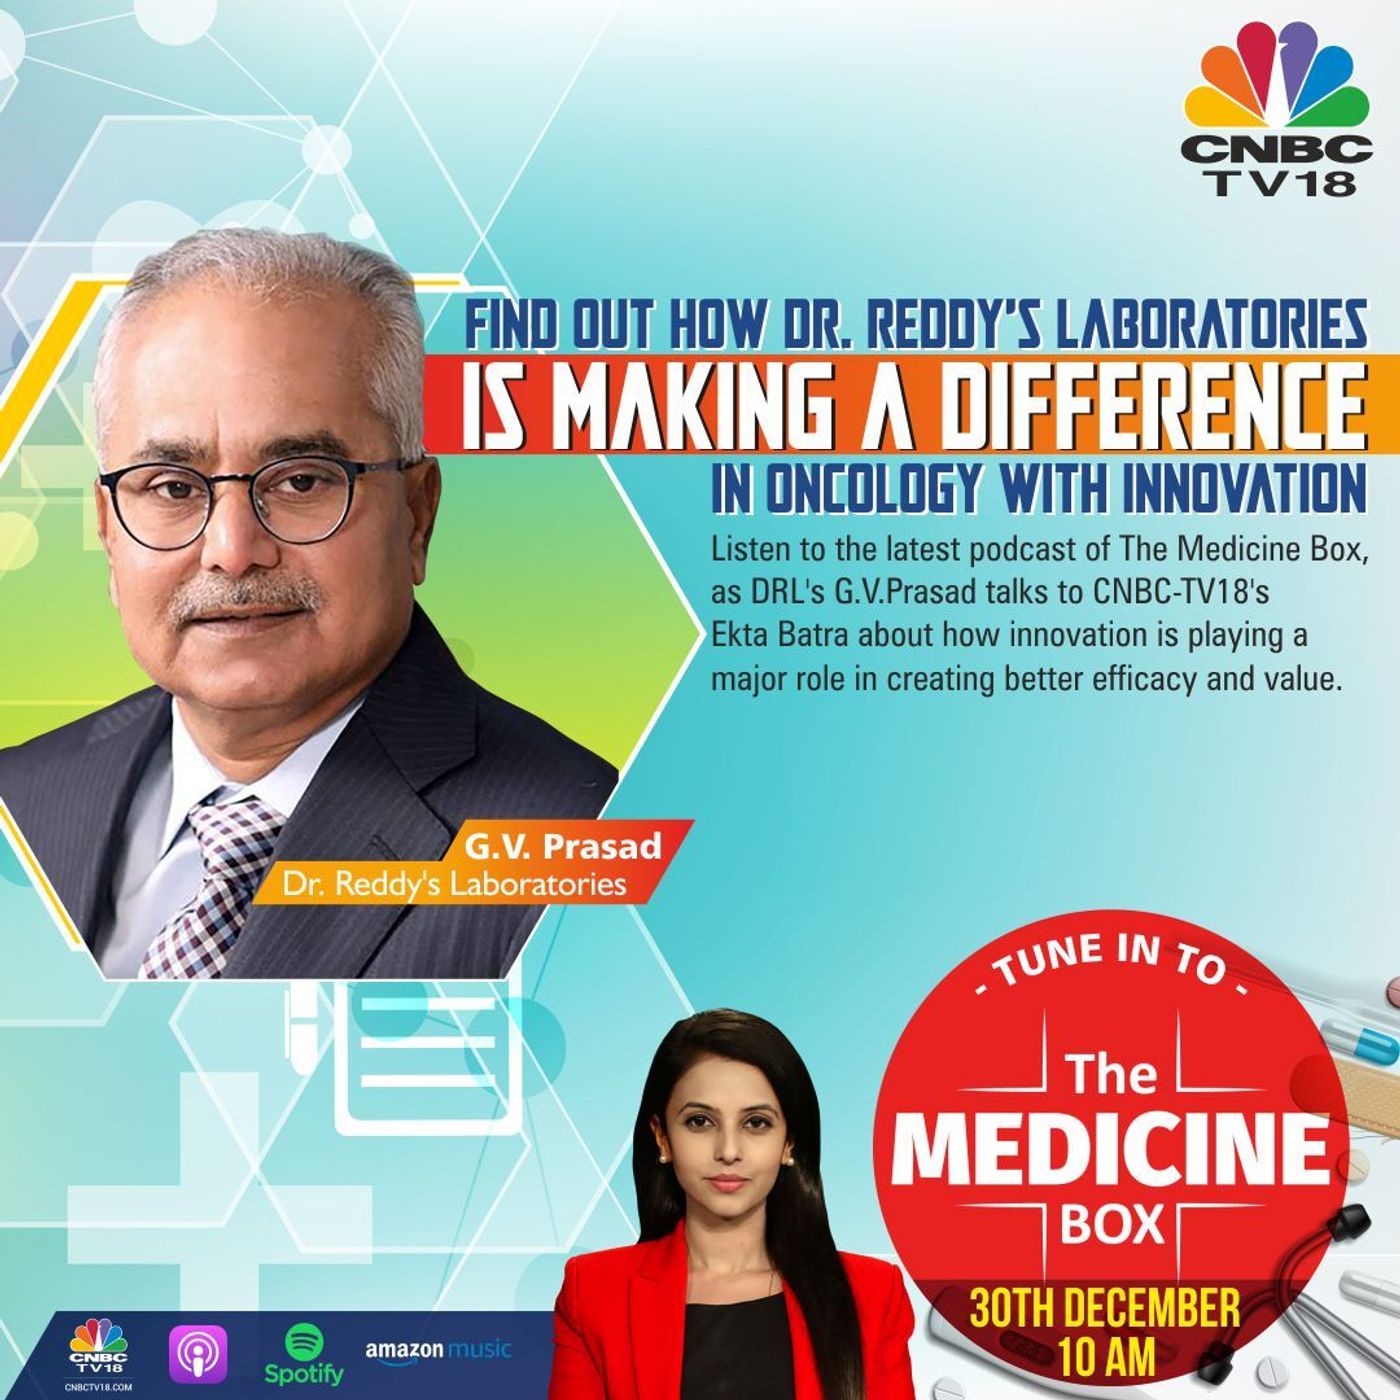 36: The Medicine Box Podcast: India can become leader of innovative drugs, funding huge challenge, says Dr Reddy’s GV Prasad